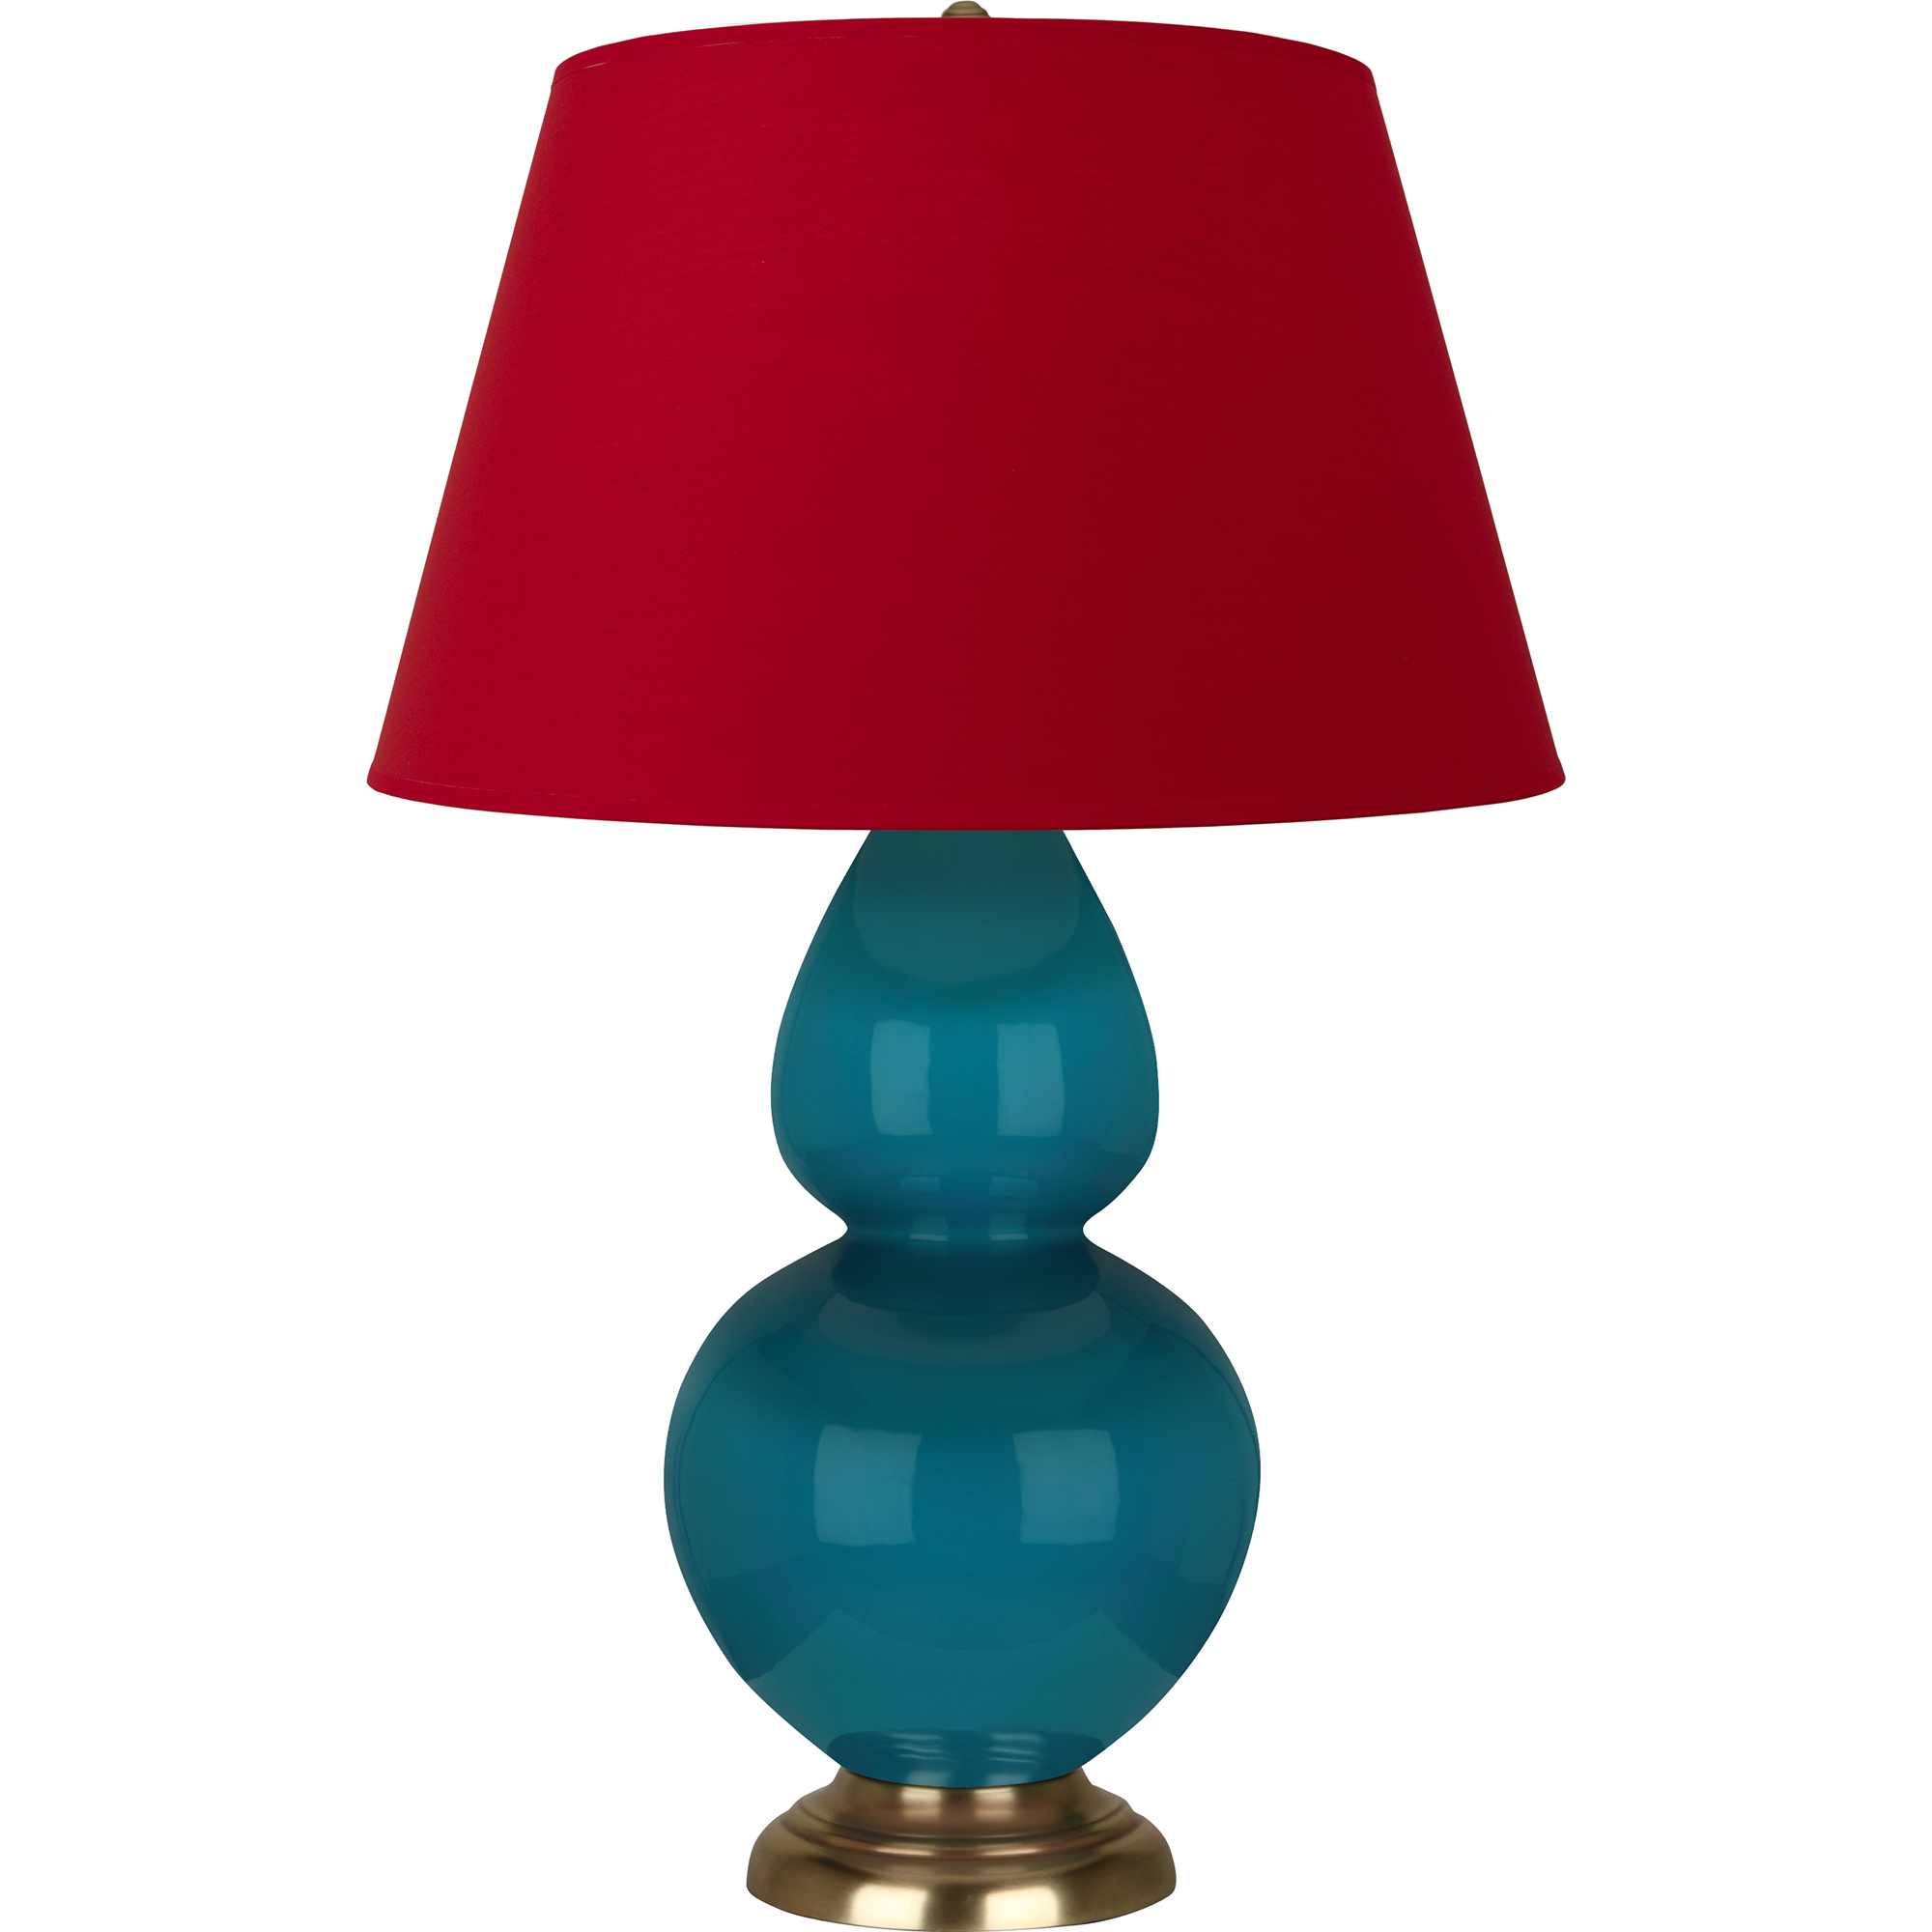 Double Gourd Table Lamp Style #1751R